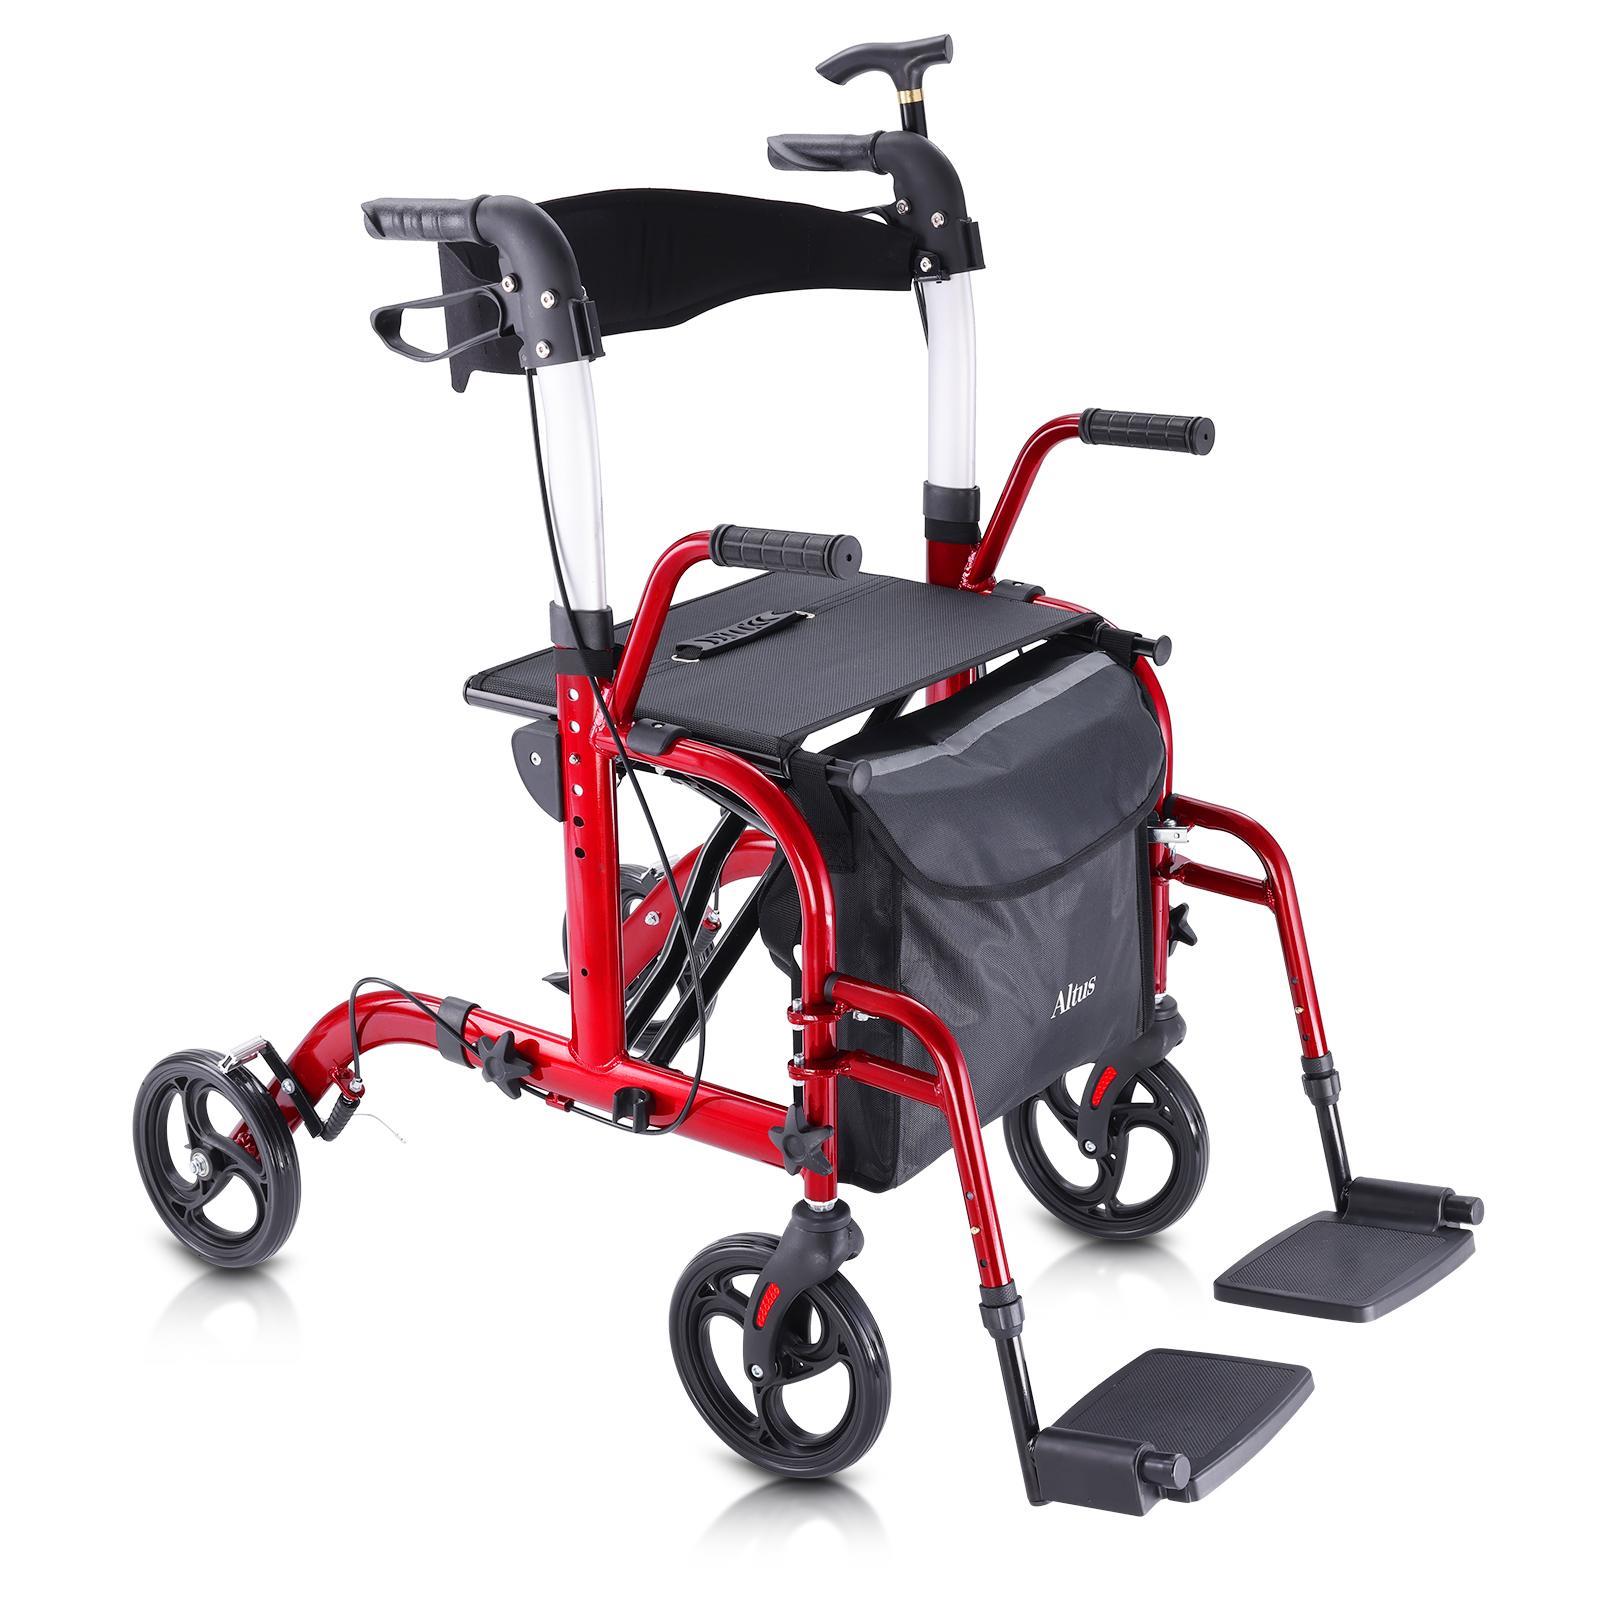 Altus Hybrid Duo 2-in-1 Mobility Rollator and Transit Wheelchair Combo Walker with Seat Red